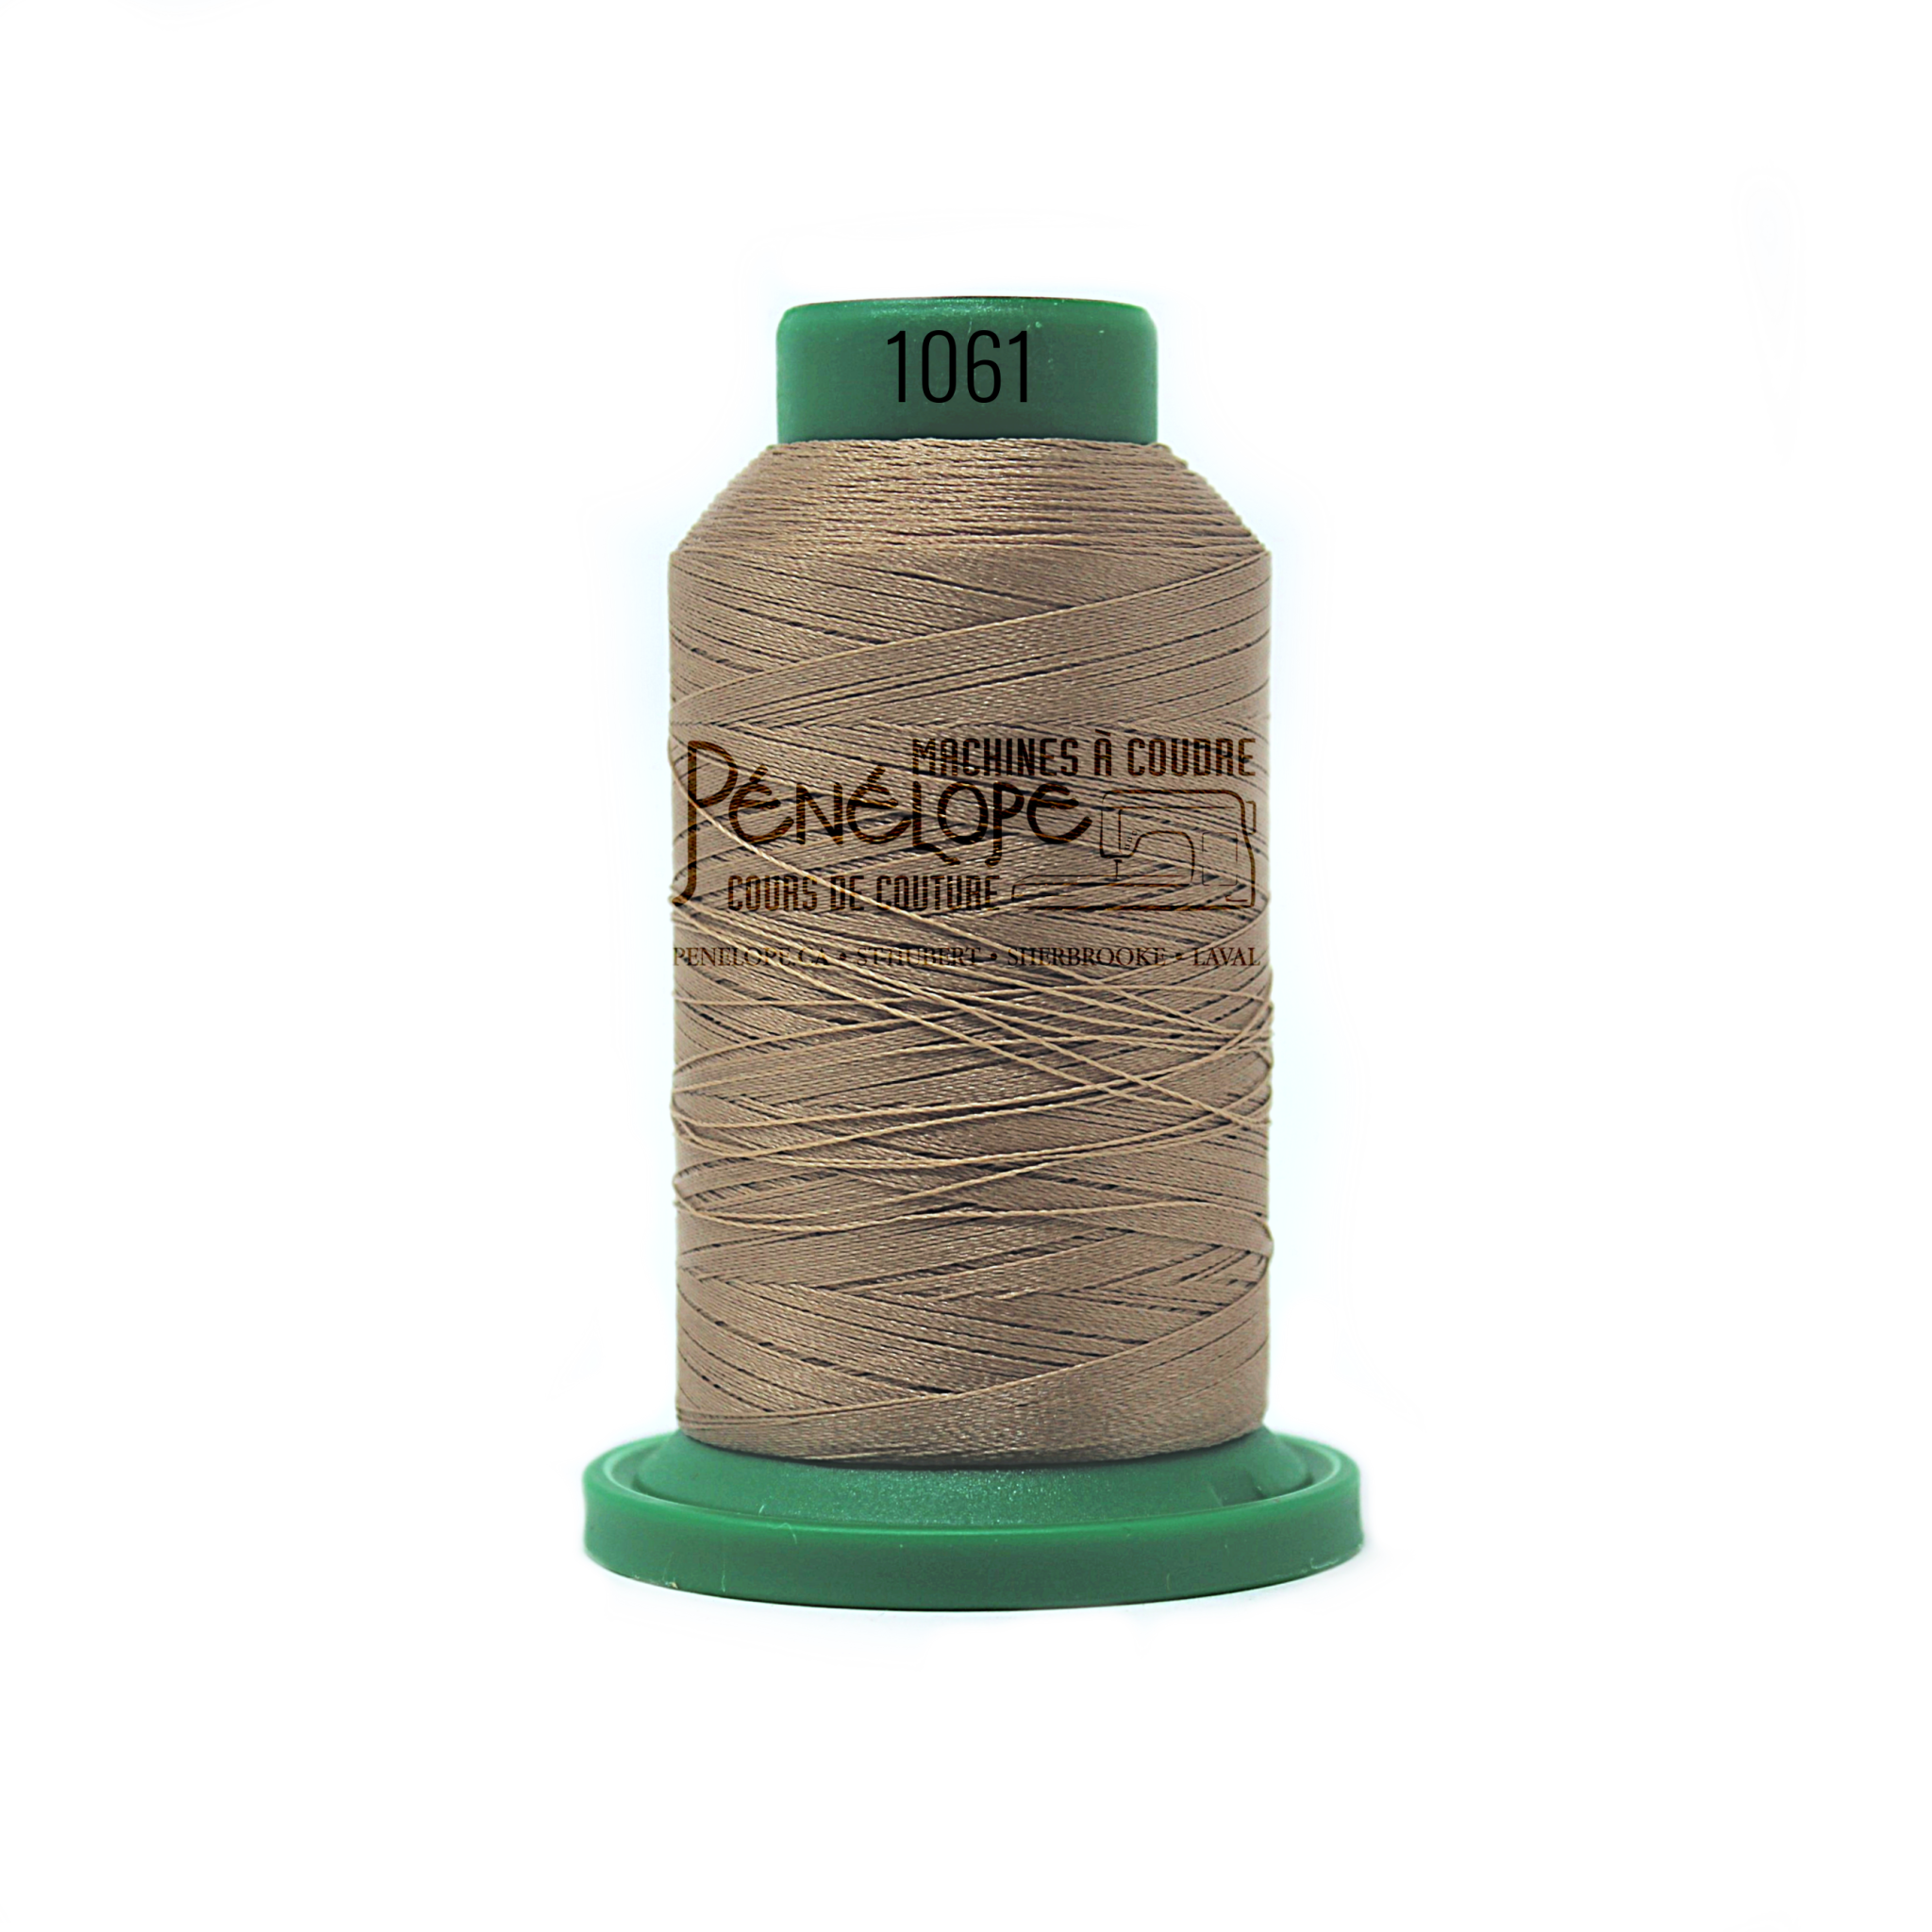 Isacord Isacord sewing and embroidery thread 1061